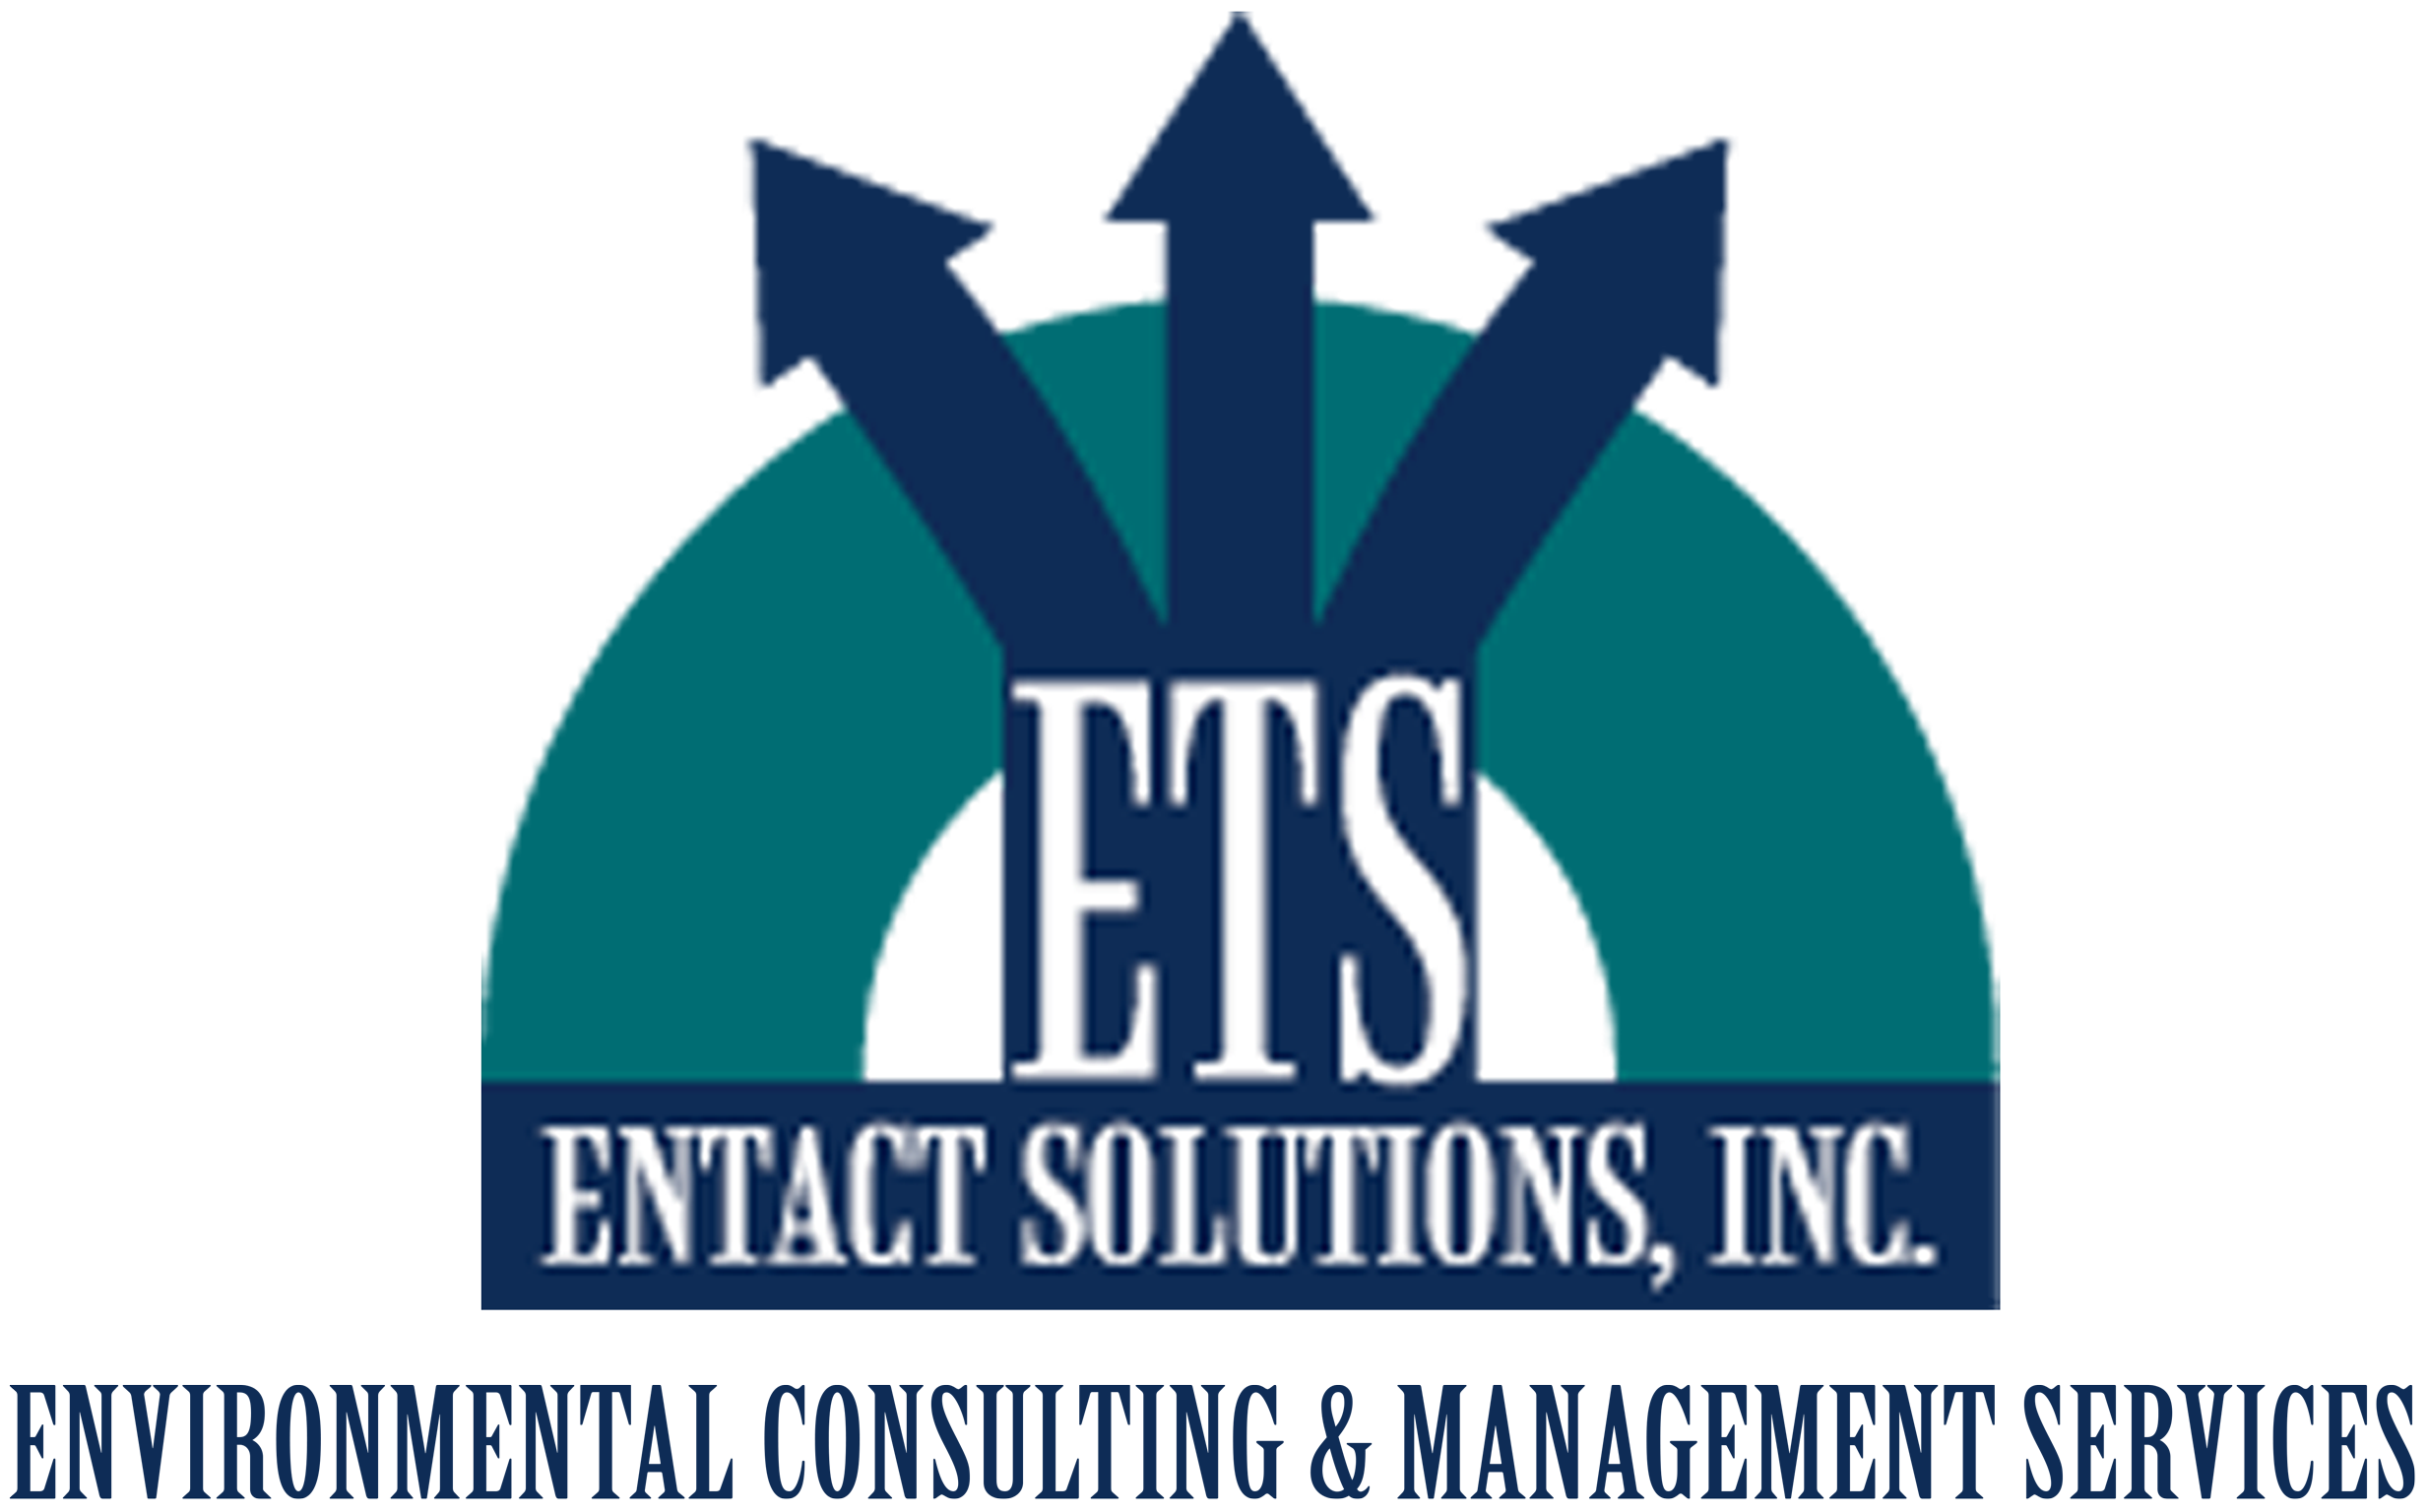 EnTact Solutions, Inc. (ETS)